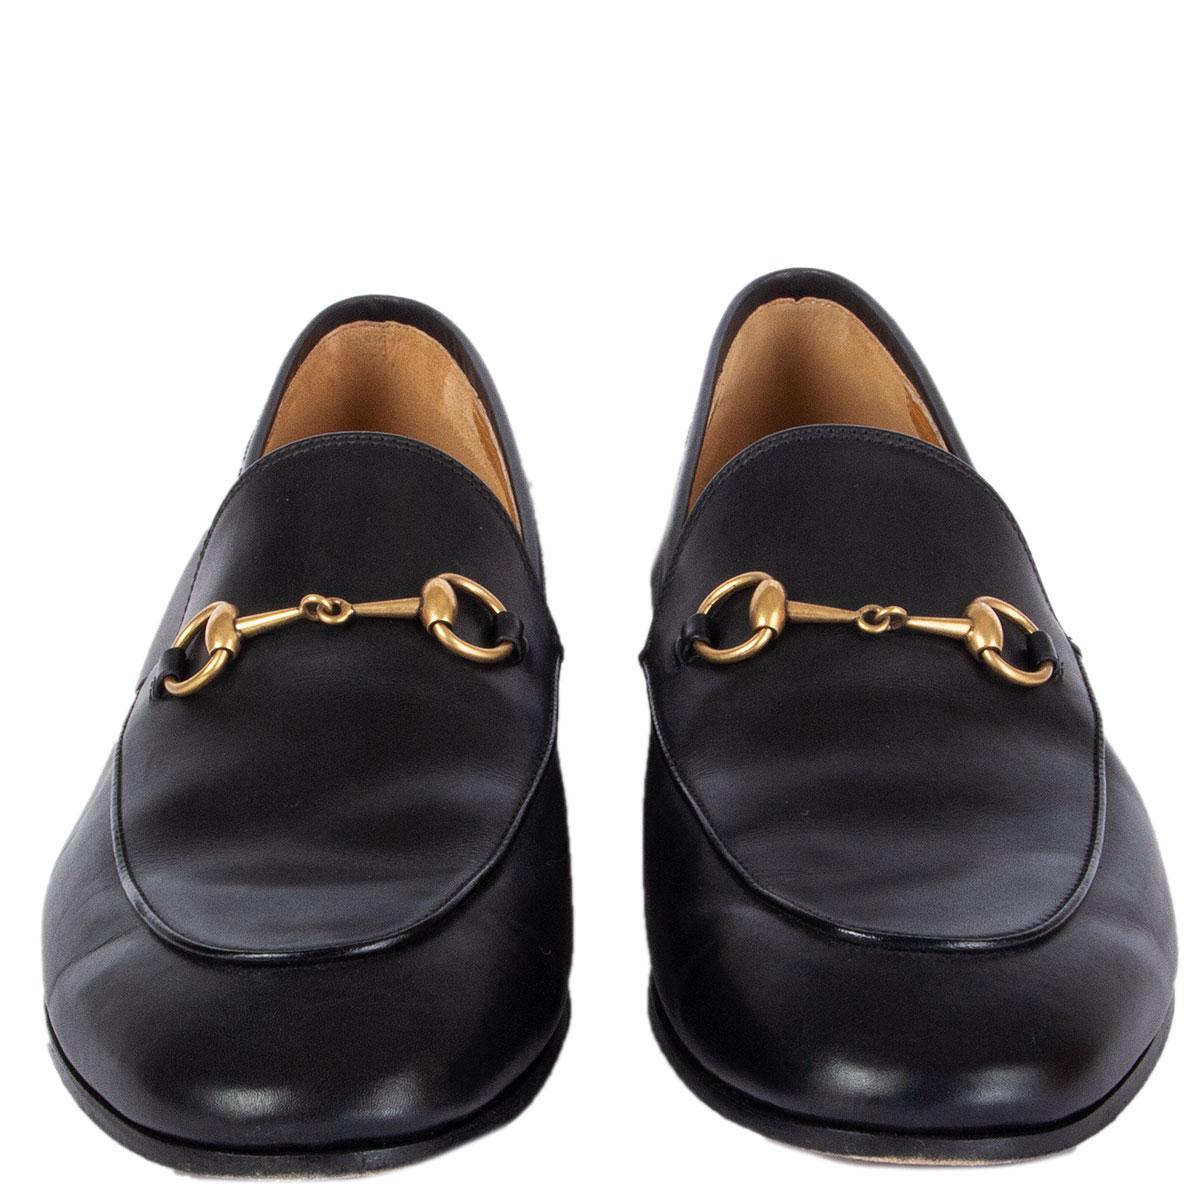 100% authentic Gucci Jordaan horse-bit loafers in black leather. Have been worn and are in excellent condition. 

Imprinted Size 42
Shoe Size 42
Inside Sole 28.5cm (11.1in)
Width 8.5cm (3.3in)
Hardware Antique Gold-Tone

All our listings include